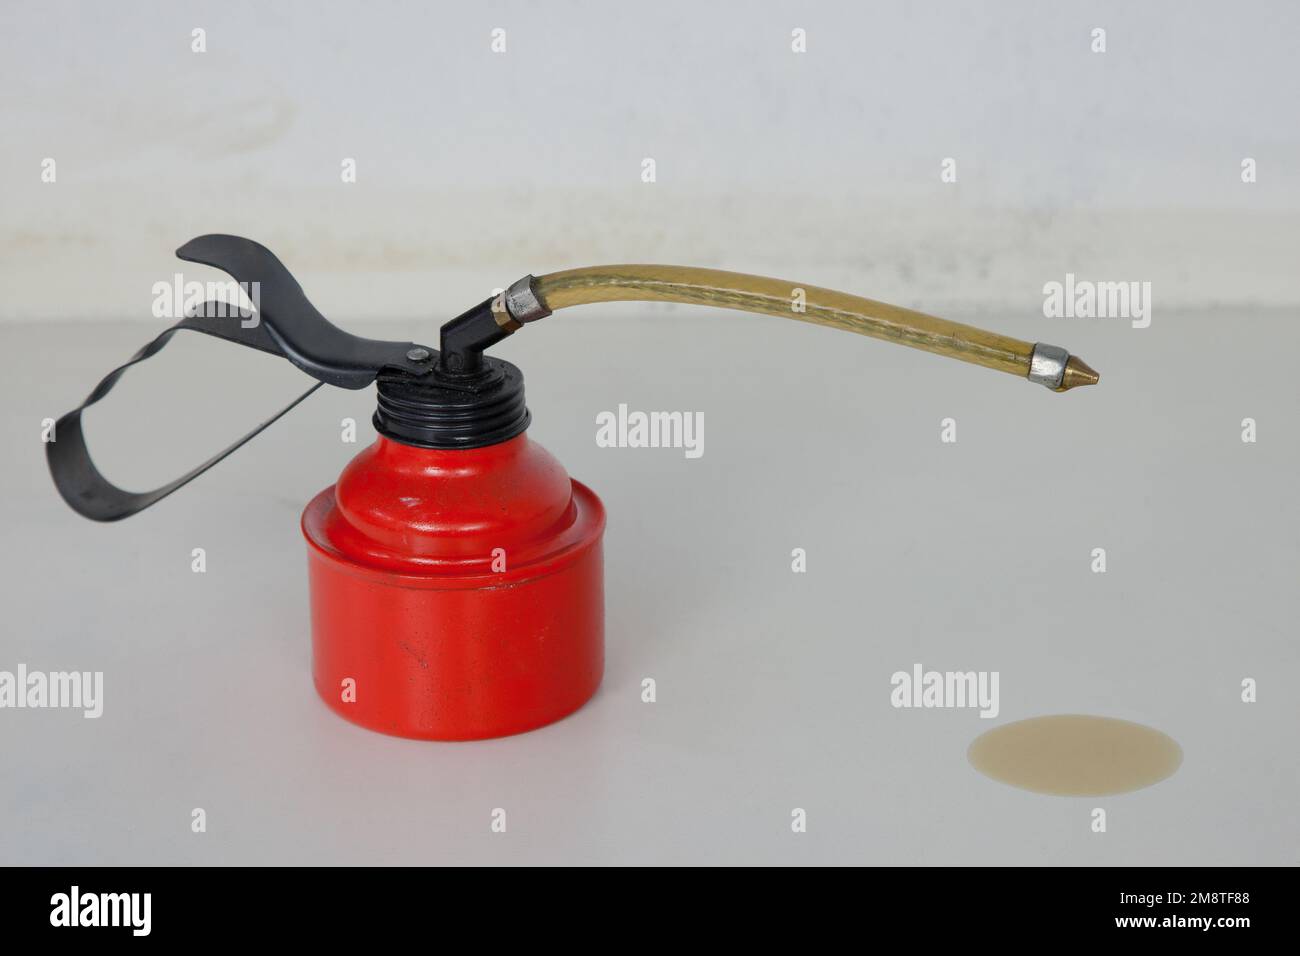 oil stain. A red oil can with a flexible spout stands on the white workbench. From his tip Oil dripped onto the work surface. Stock Photo